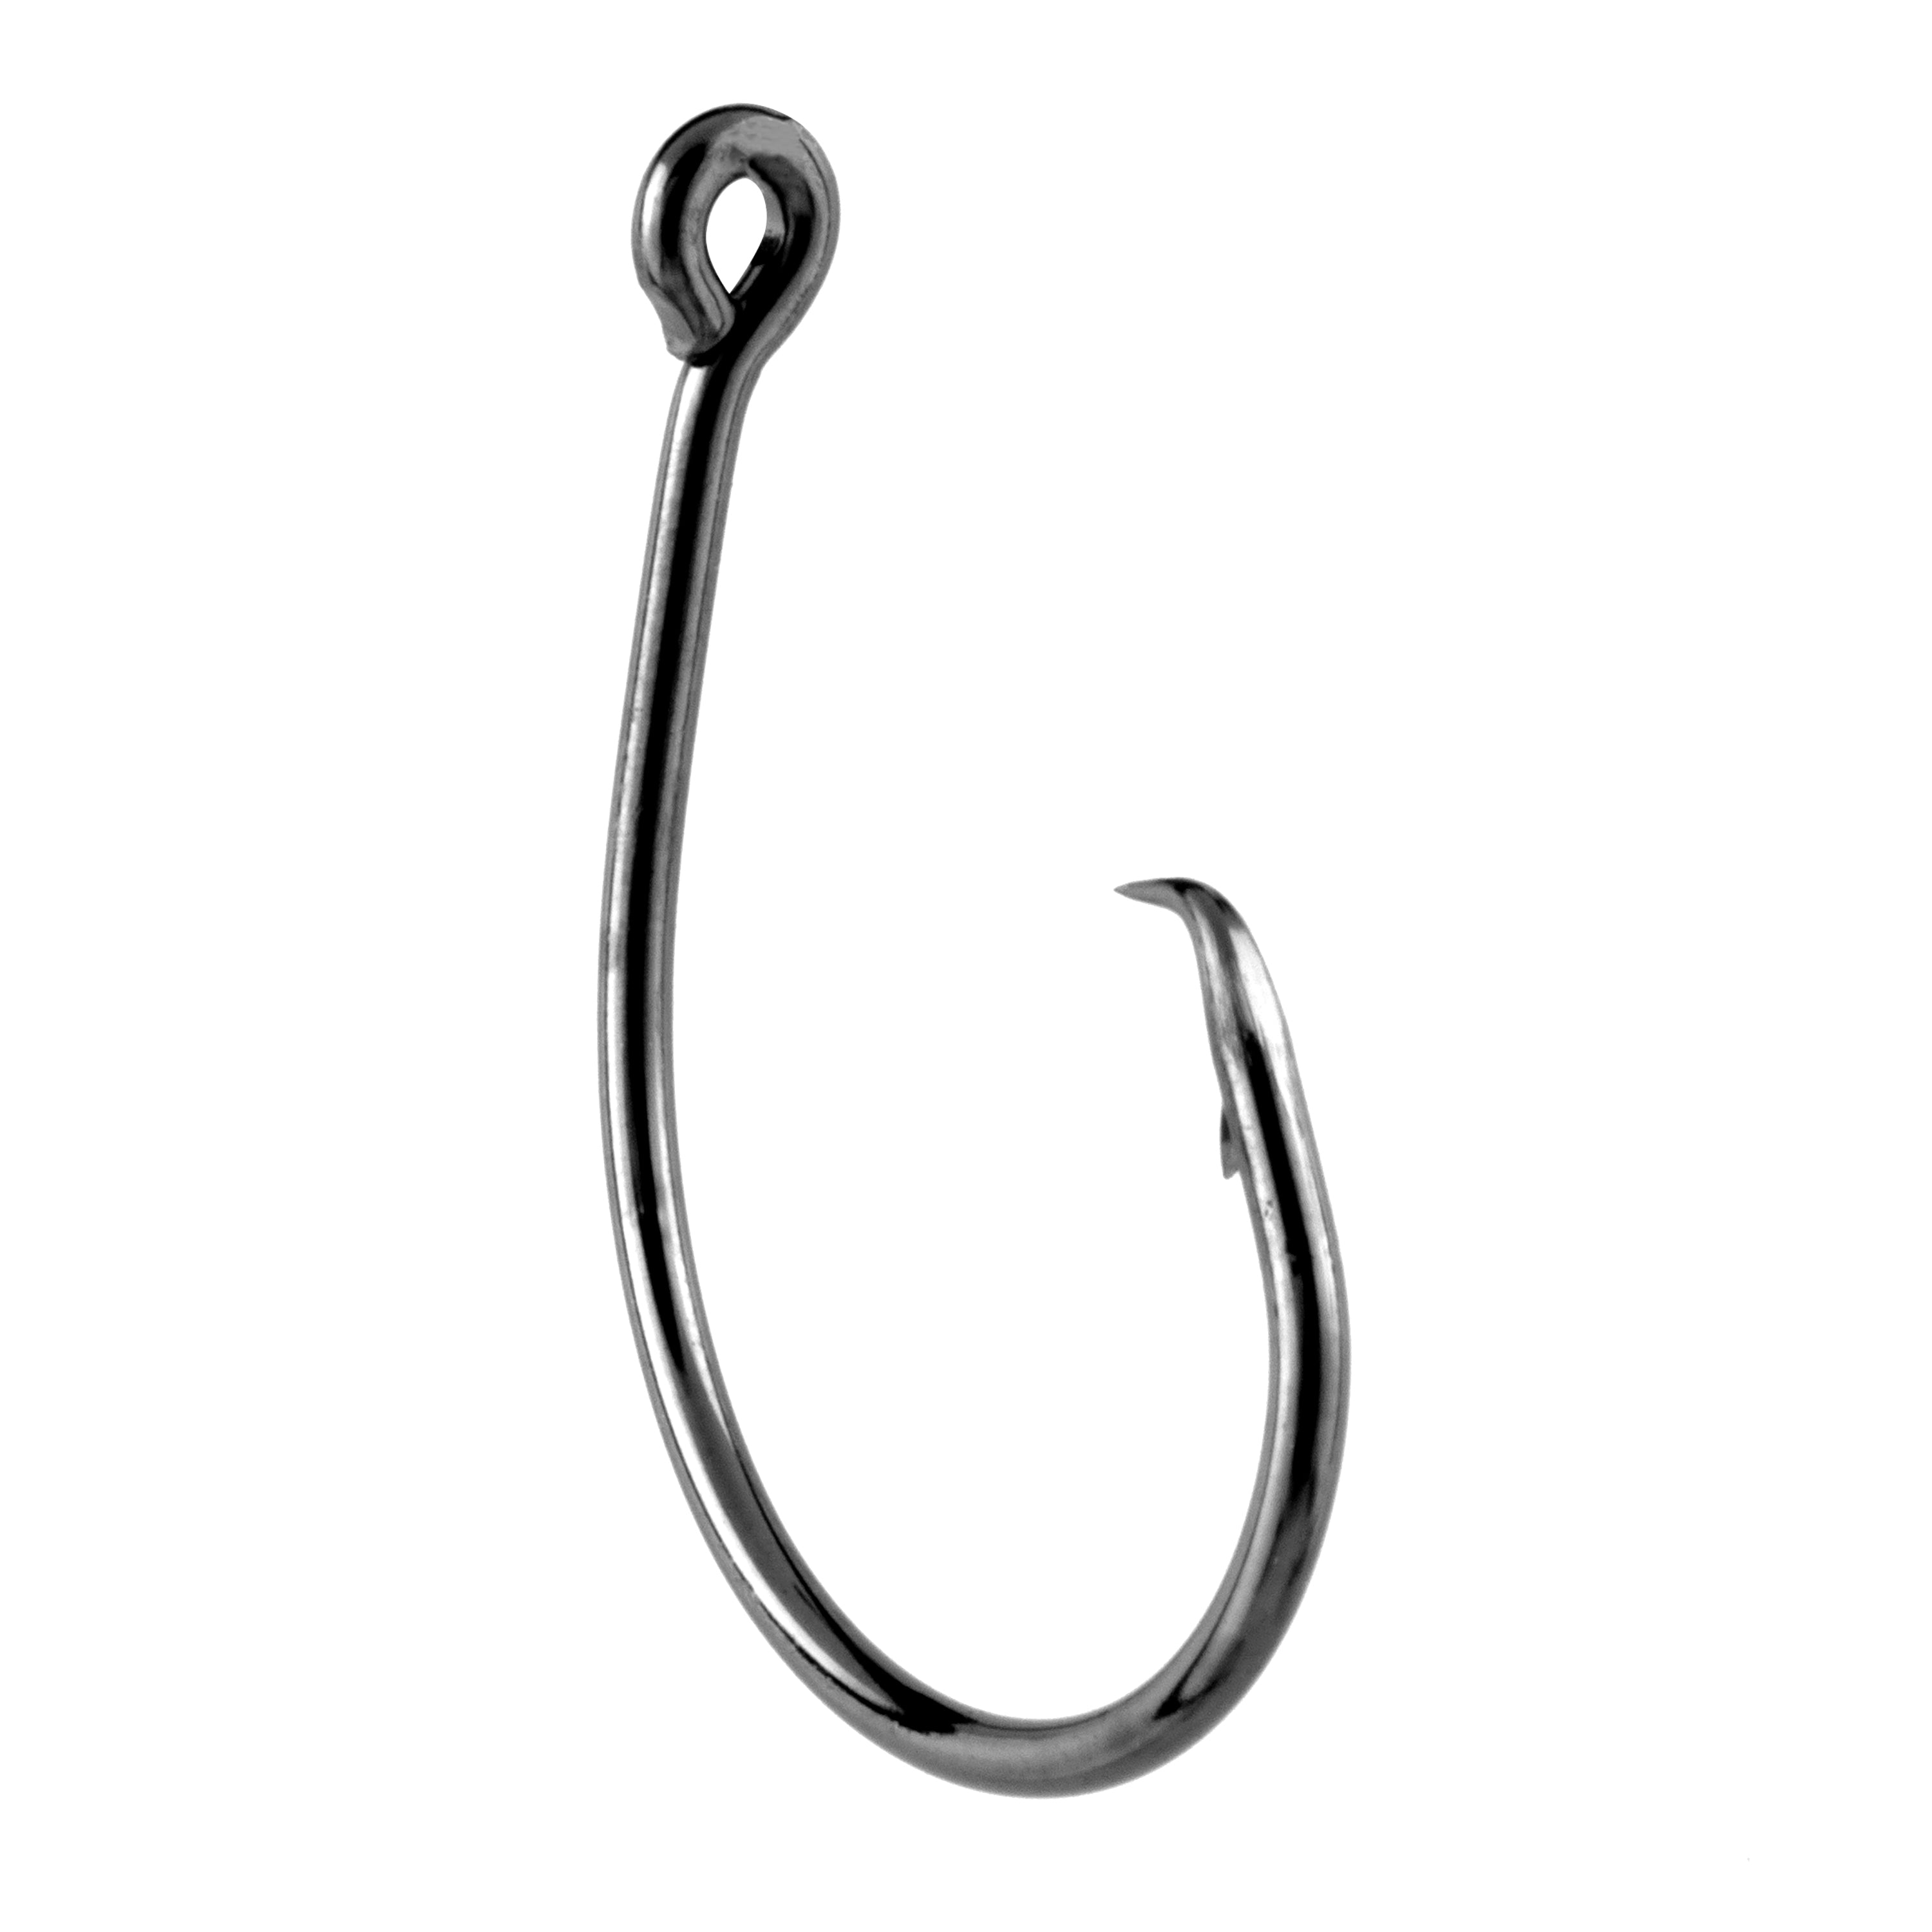 Academy Sports + Outdoors Tsunami Cable/Wire Shark Rig 18/0 Circle Hook